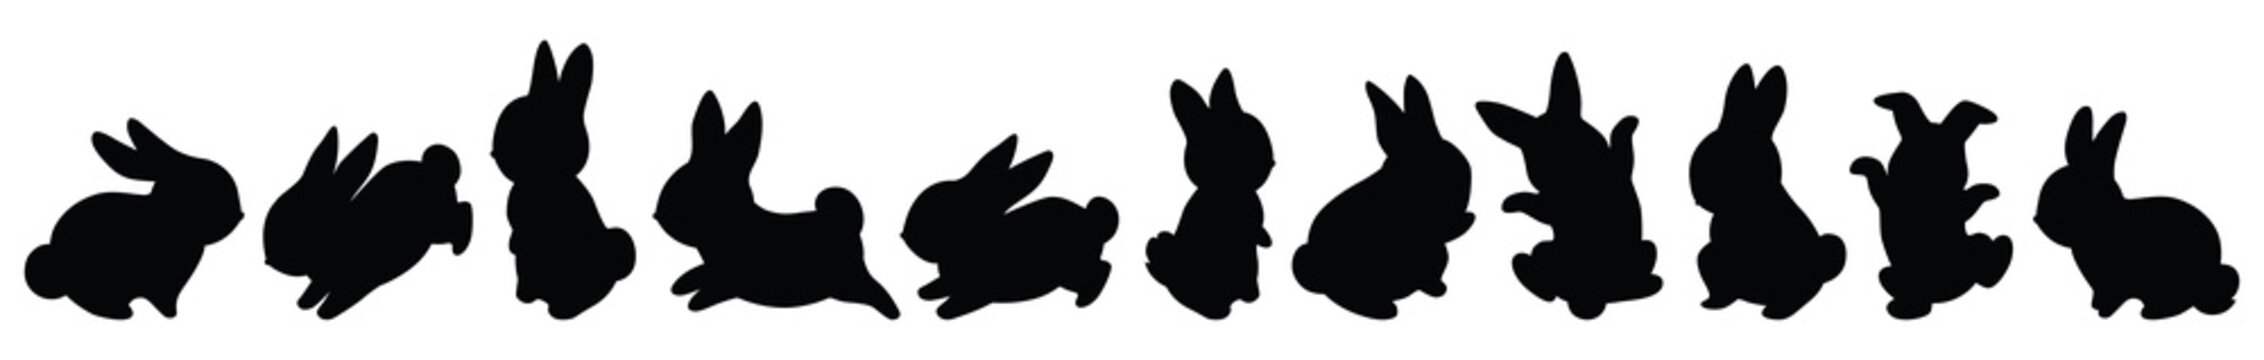 Silhouette black cute bunny. Cute cartoon rabbits. Funny hares, Easter bunnies. Standing, running, jumping poses. Set of flat cartoon vector illustrations isolated on white background. Outlines animal